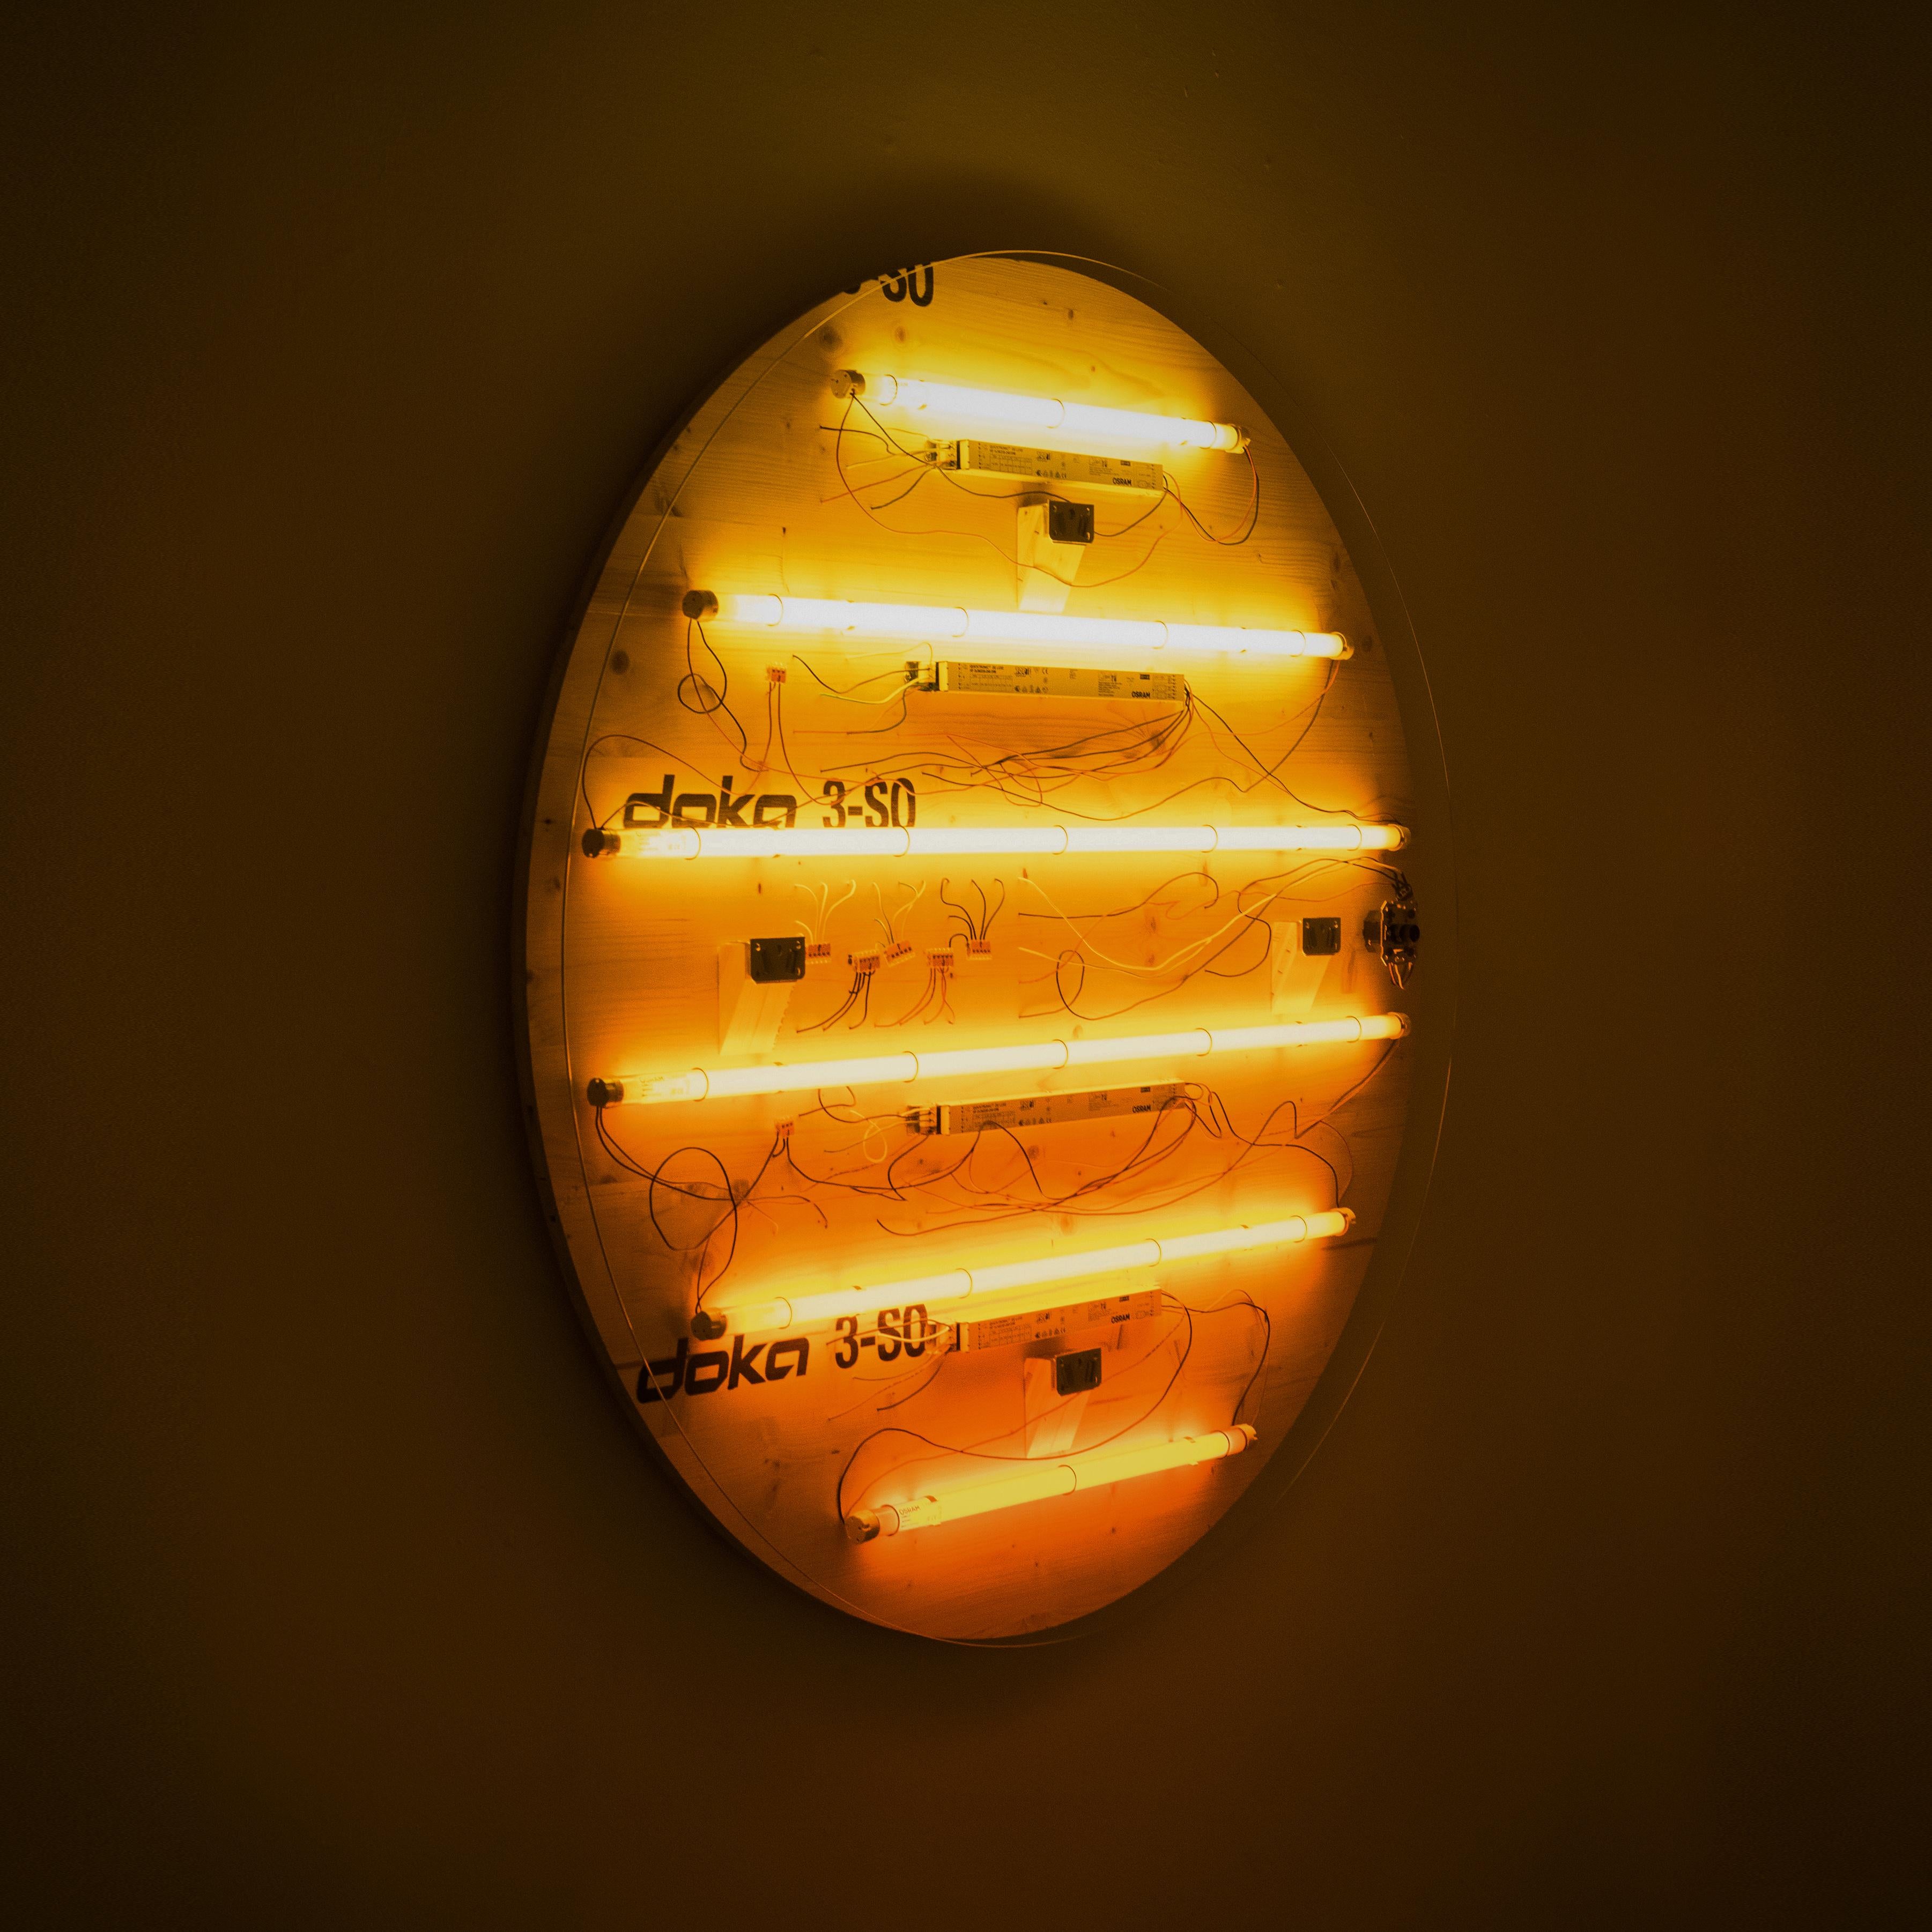 Private sunset wall lamp is presented by Galerija VARTAI

Personal Sunset is a limited edition wall lamp designed by Martynas Kazimierenas. Made from fluorescent lamps, doka 3-SO boards, tampered glass and potentiometer, this unique design piece